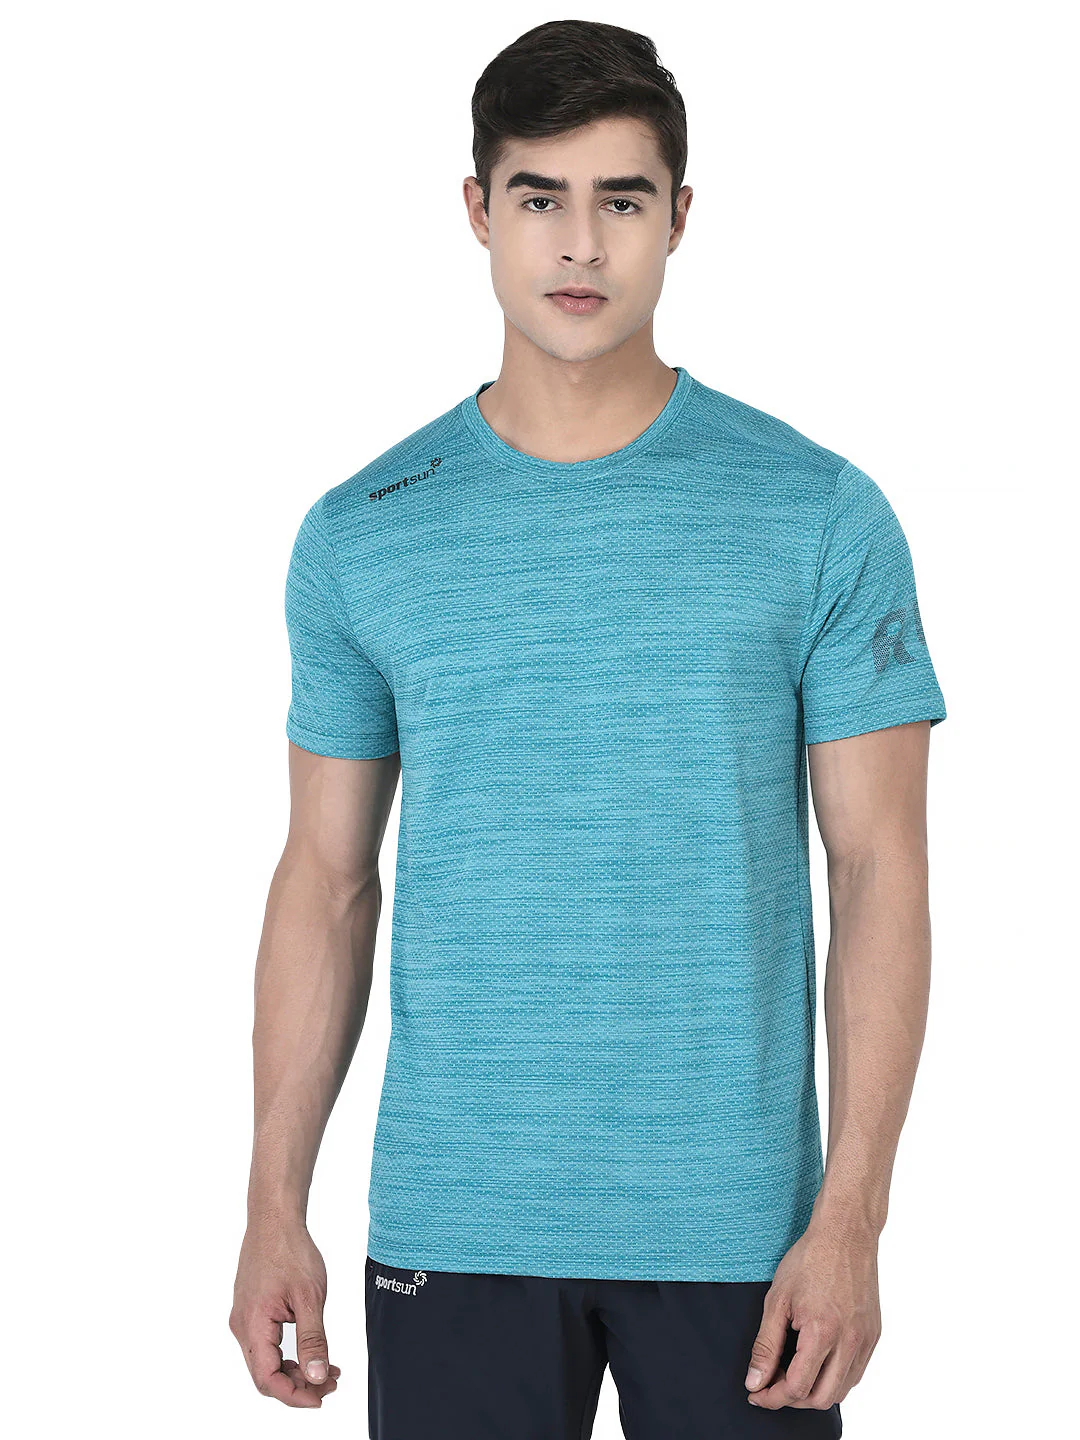 ROUND NECK T SHIRT (DRY FIT)